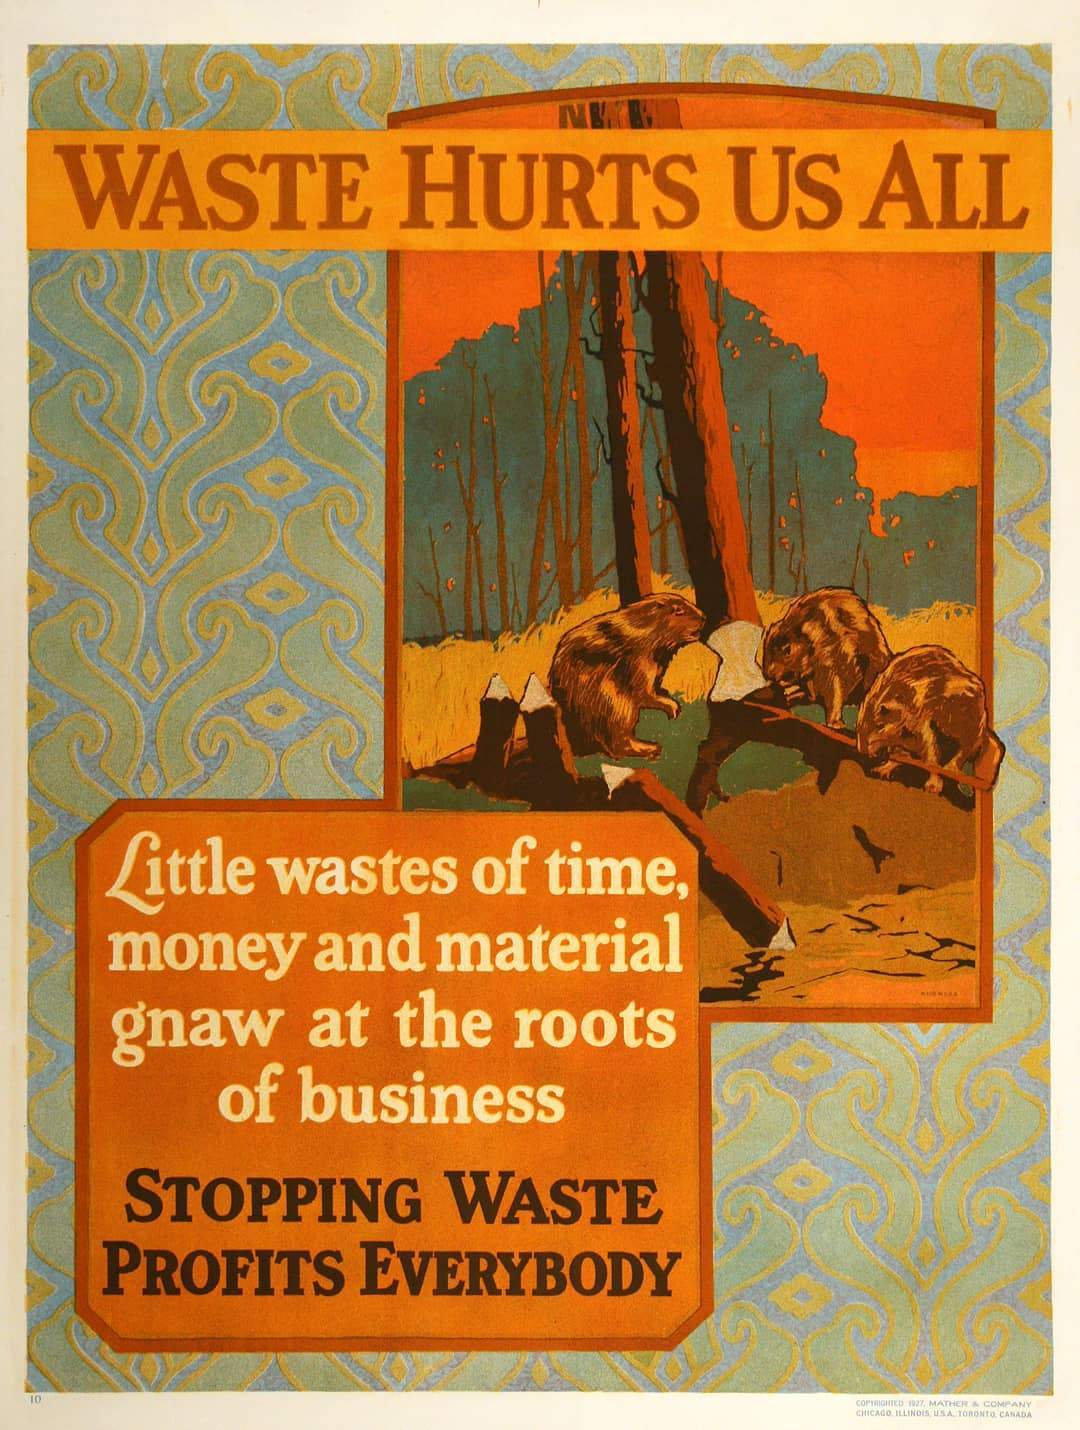 Oiriginal Mather Work Incentive Poster 1927 - Waste Hurts Us All